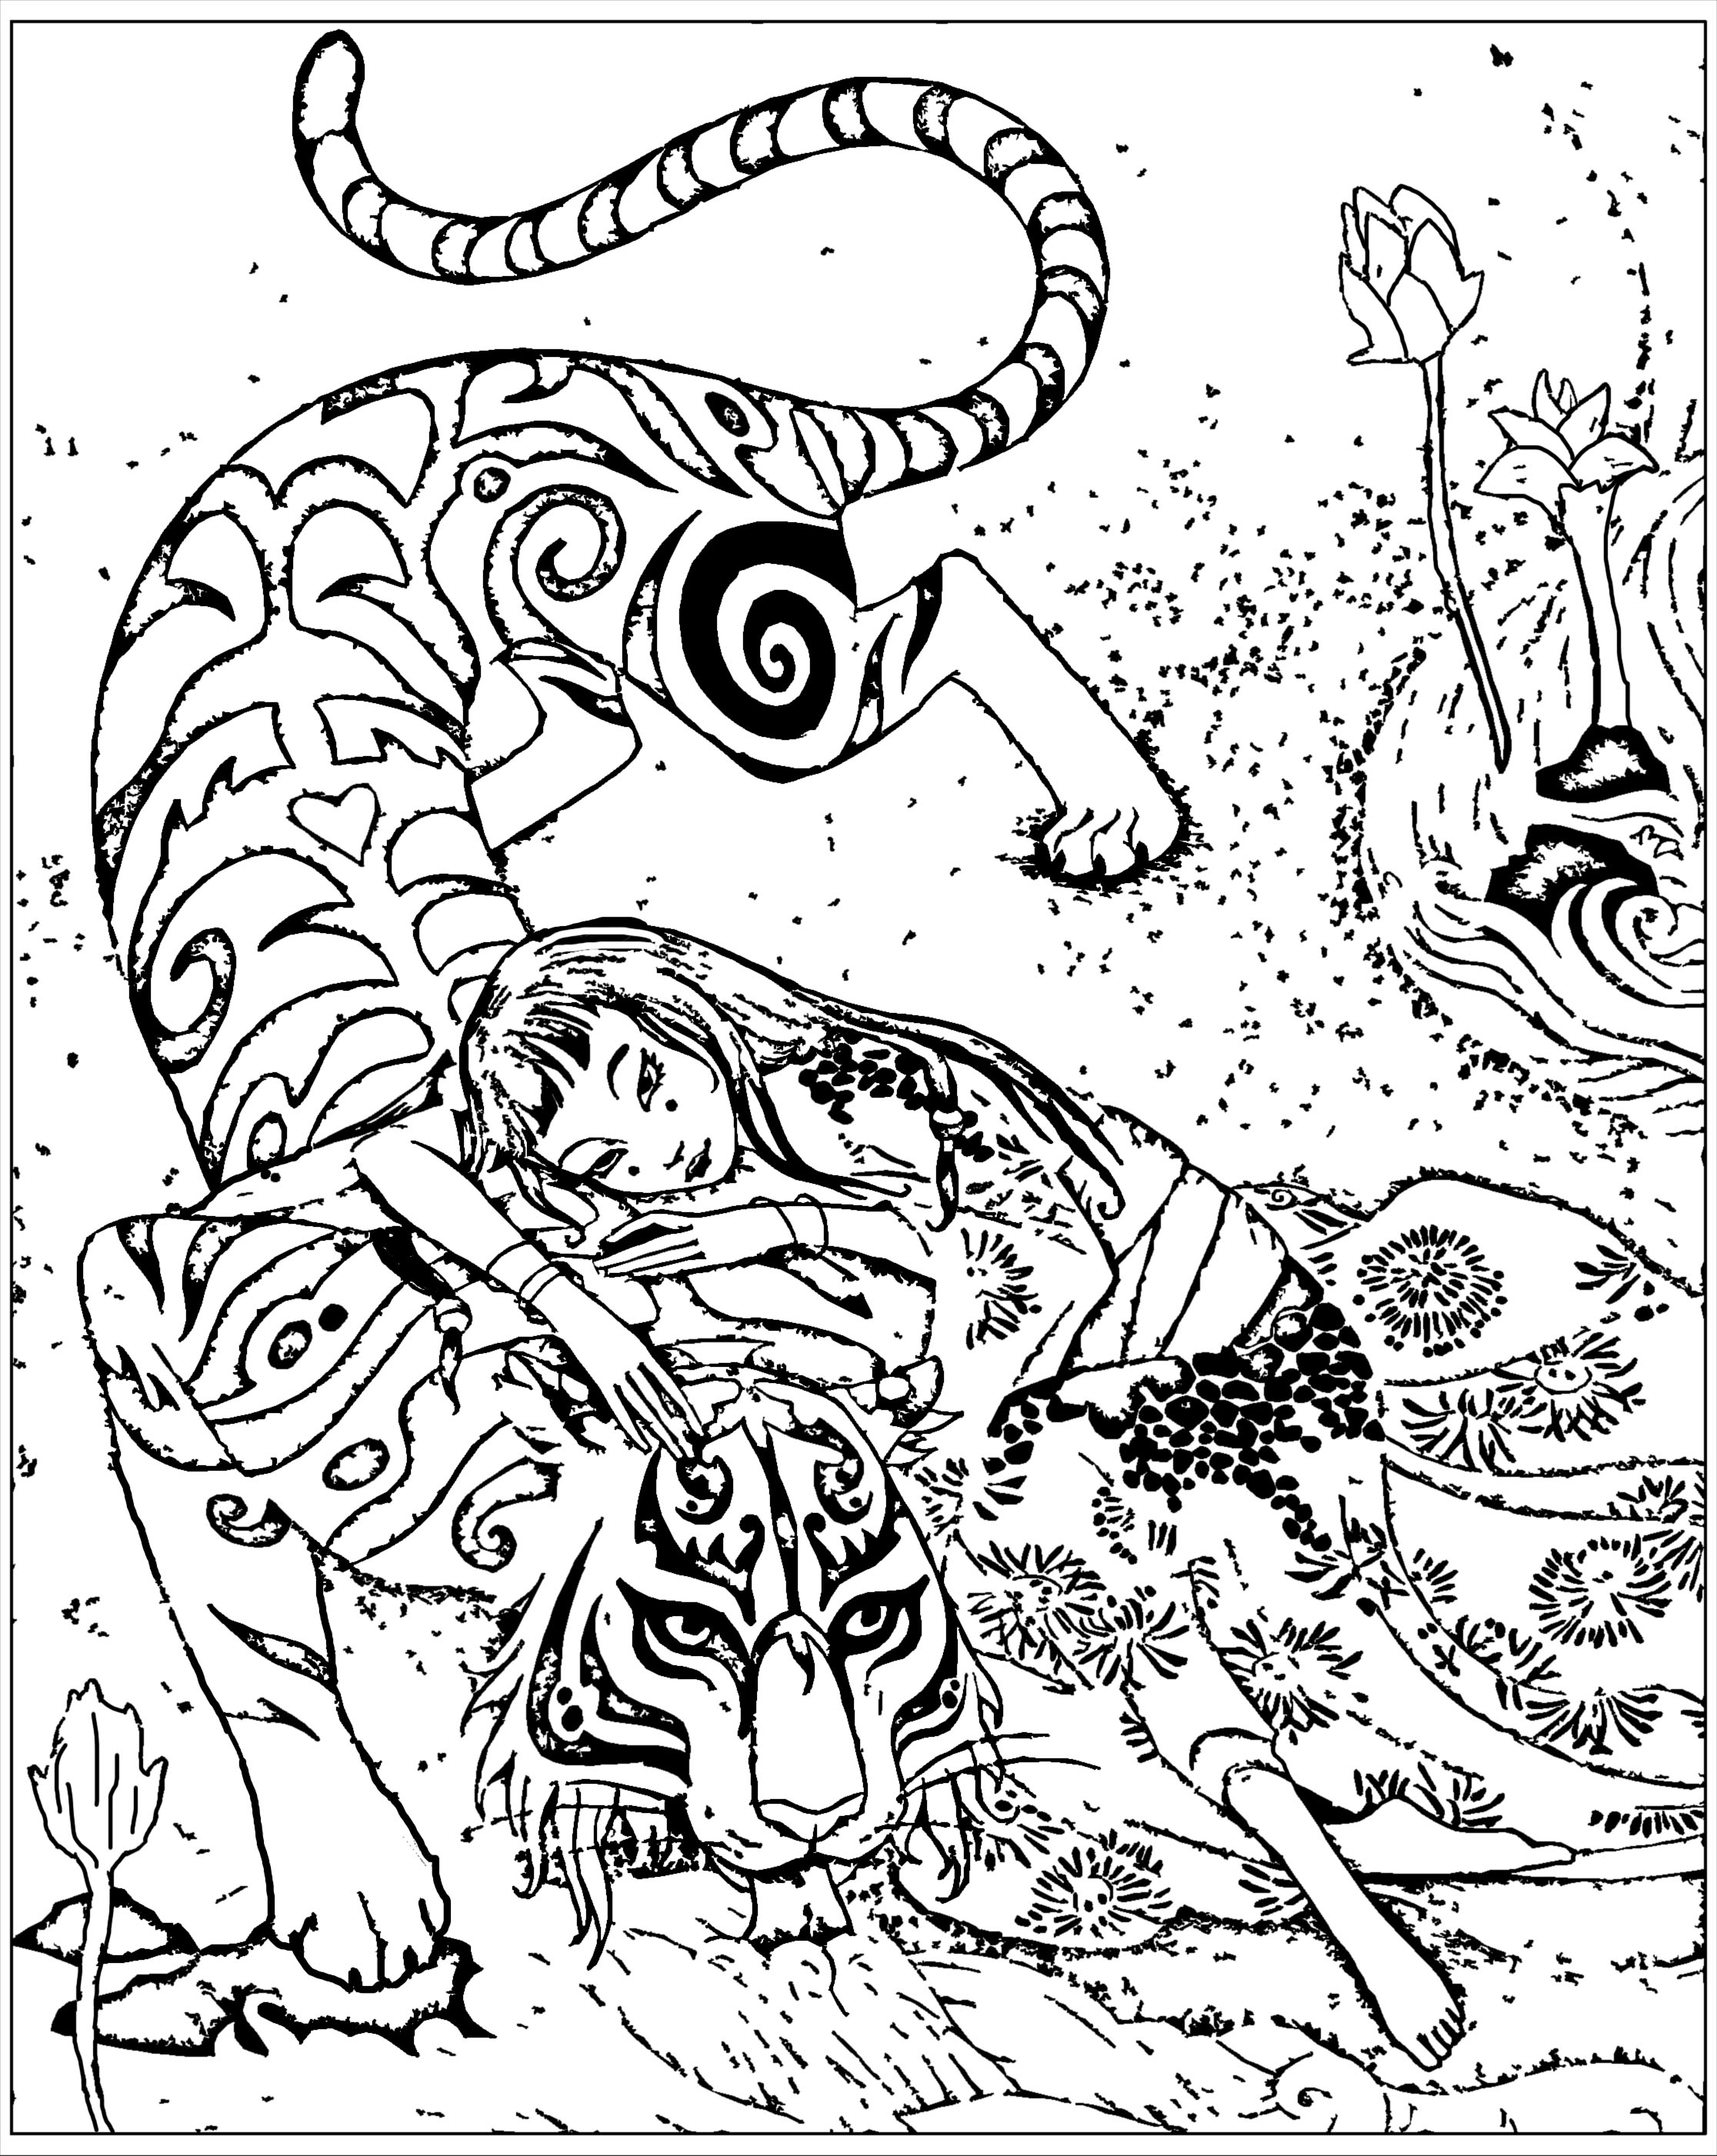 Coloring inspired by the book Le tigre dévoué, by Qi feng Shen. Qi feng Shen is a Chinese writer best known for his collection of a hundred stories mixing the supernatural with the social realities of the time ('Xieduo', 1792): texts with characters evolving in plots full of finesse and intelligence.